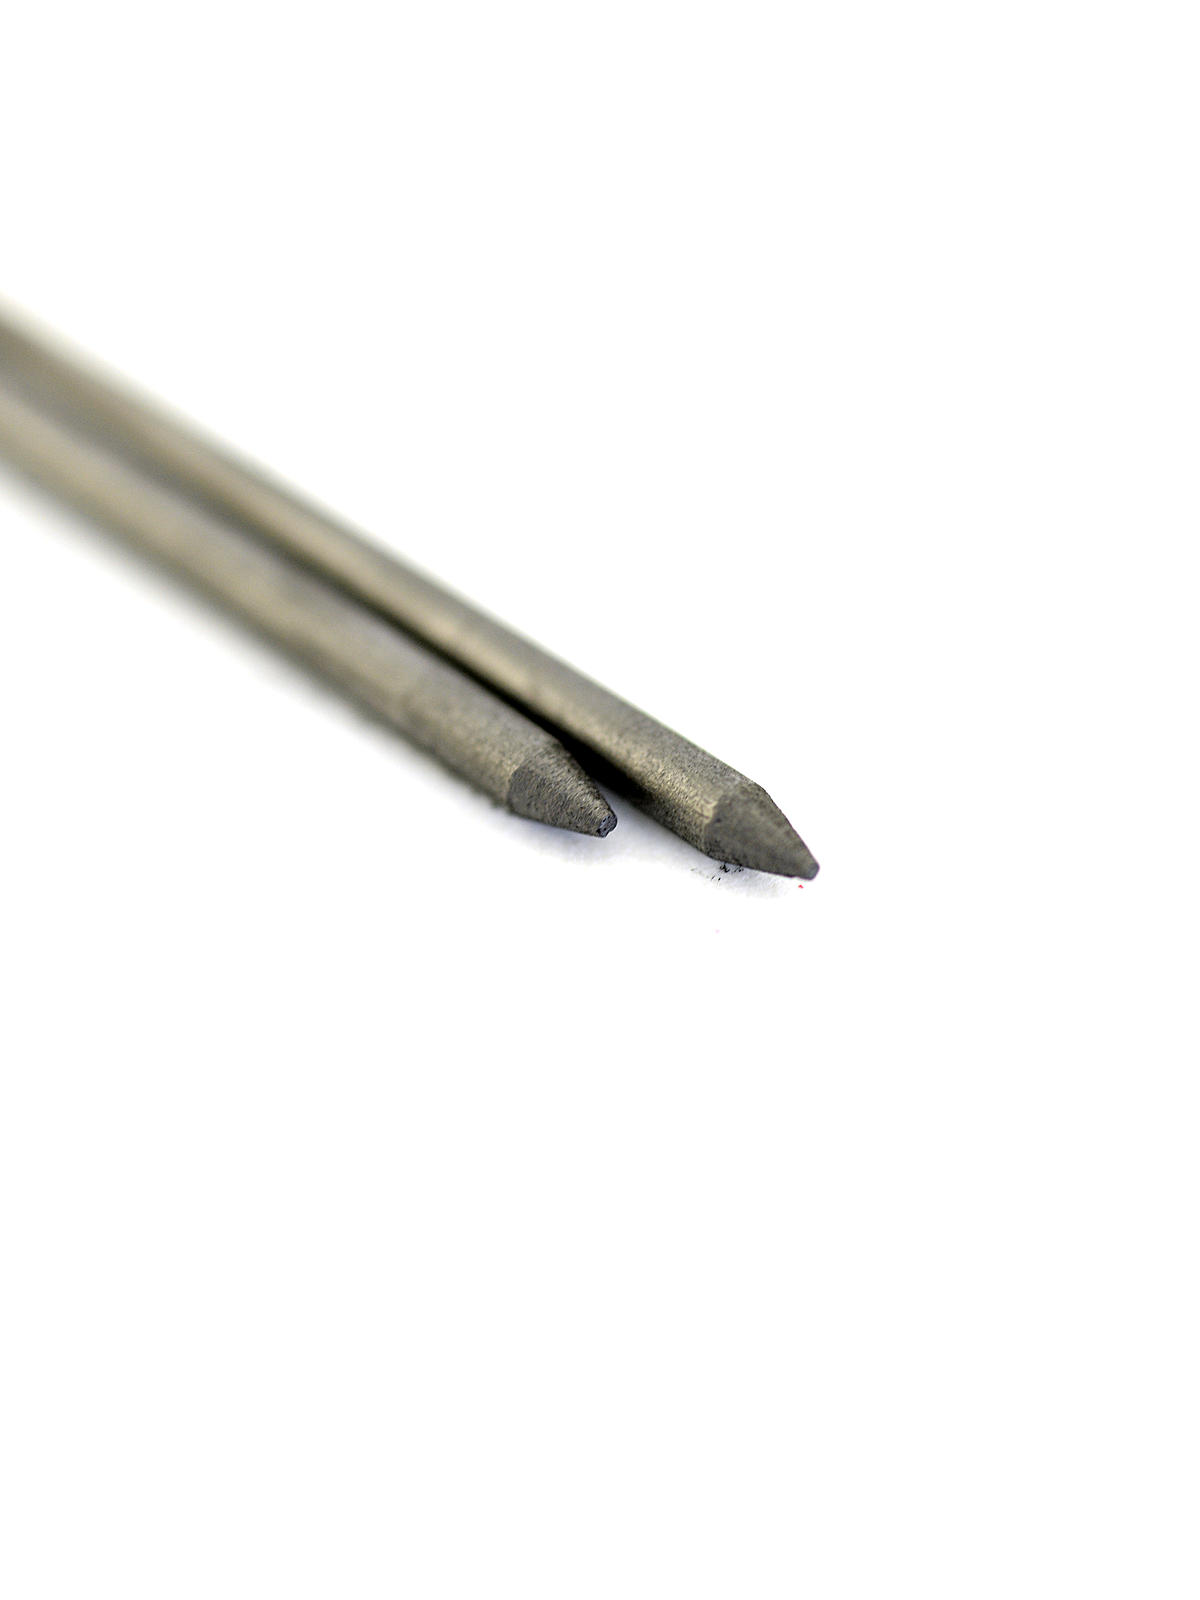 2 Mm Pencil Leads Hb